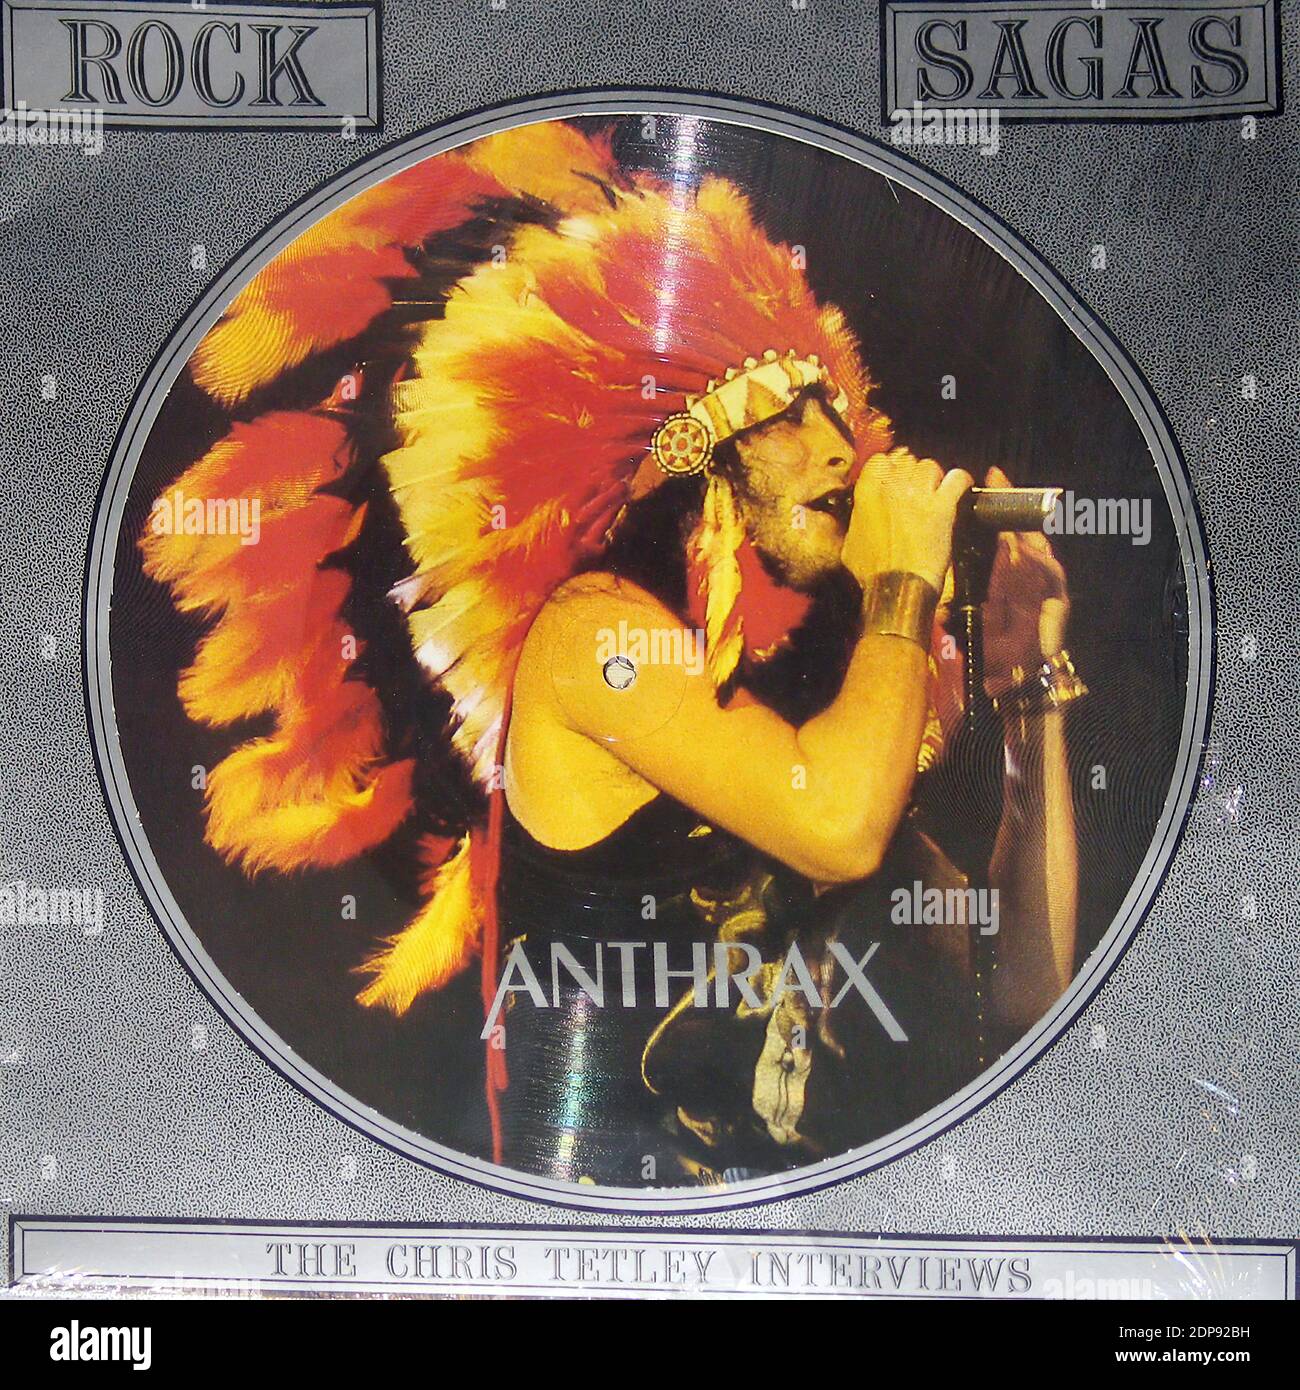 Anthrax Chris Tetley Interview Rock Sagas Picture Disc  - Vintage Vinyl Record Cover Stock Photo